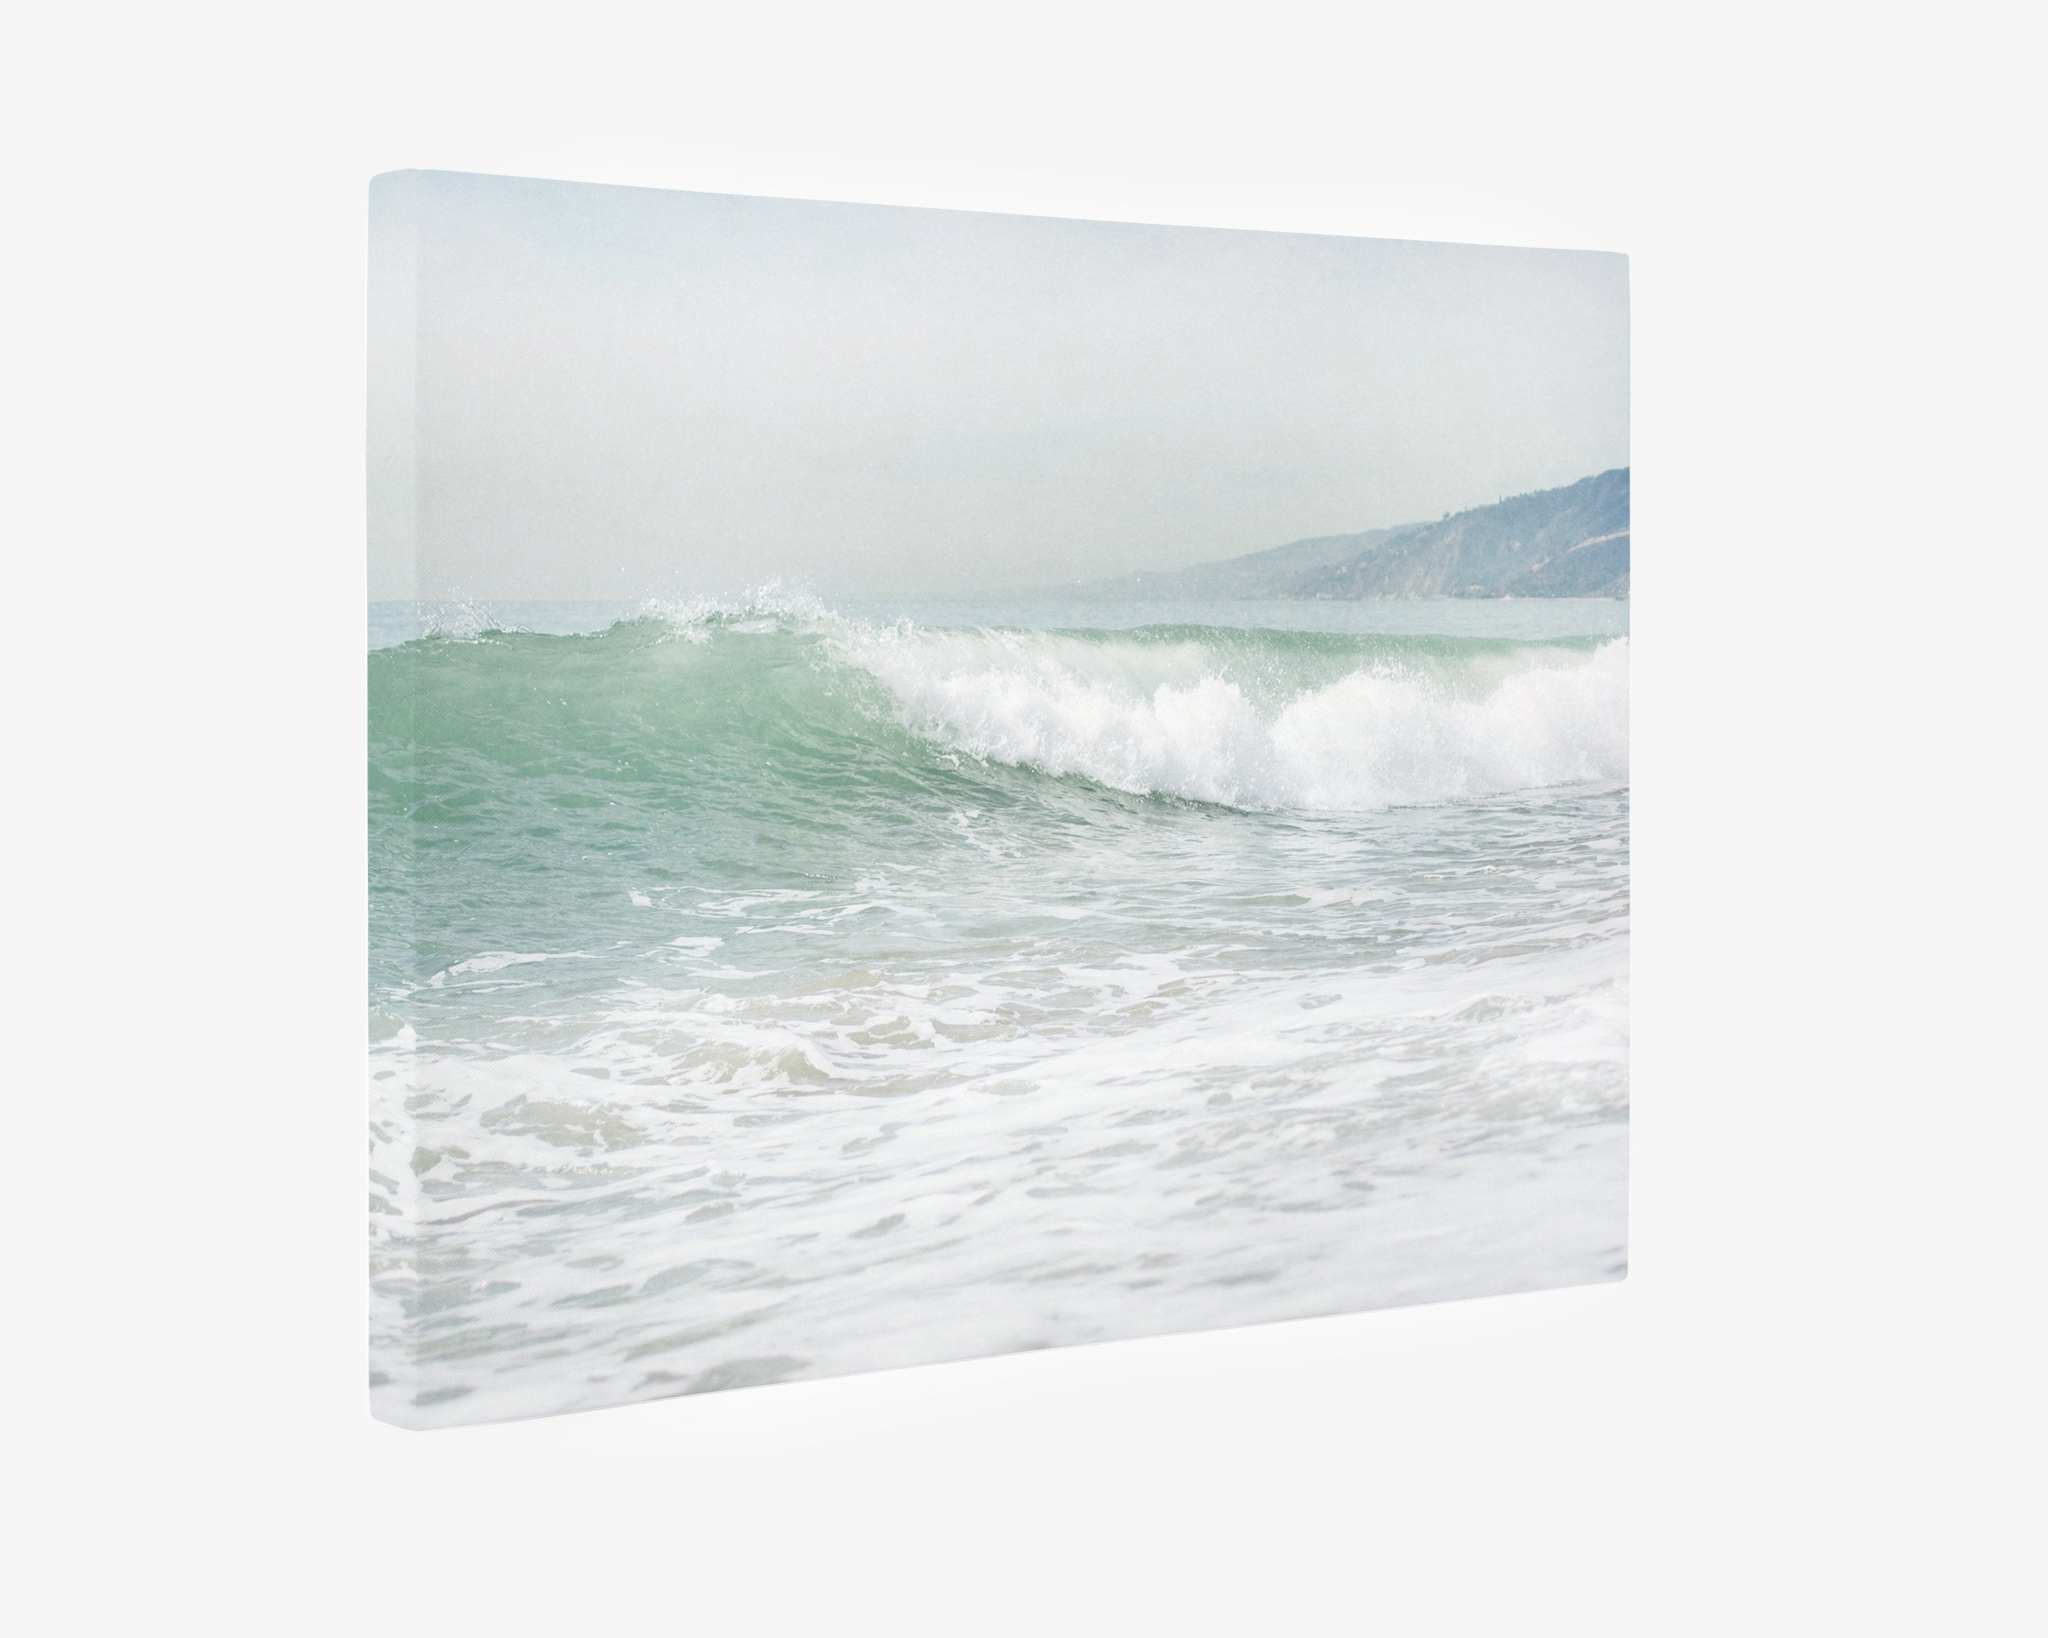 A canvas print depicts a serene coastal scene with gentle waves rolling onto the shore. The ocean water is a calm blue-green, and faint mountains can be seen in the distant background under a slightly overcast sky. This Coastal Ocean Canvas Waves Wall Art, &#39;Breaking Surf&#39; by Offley Green is crafted on premium artist-grade canvas for lasting beauty.